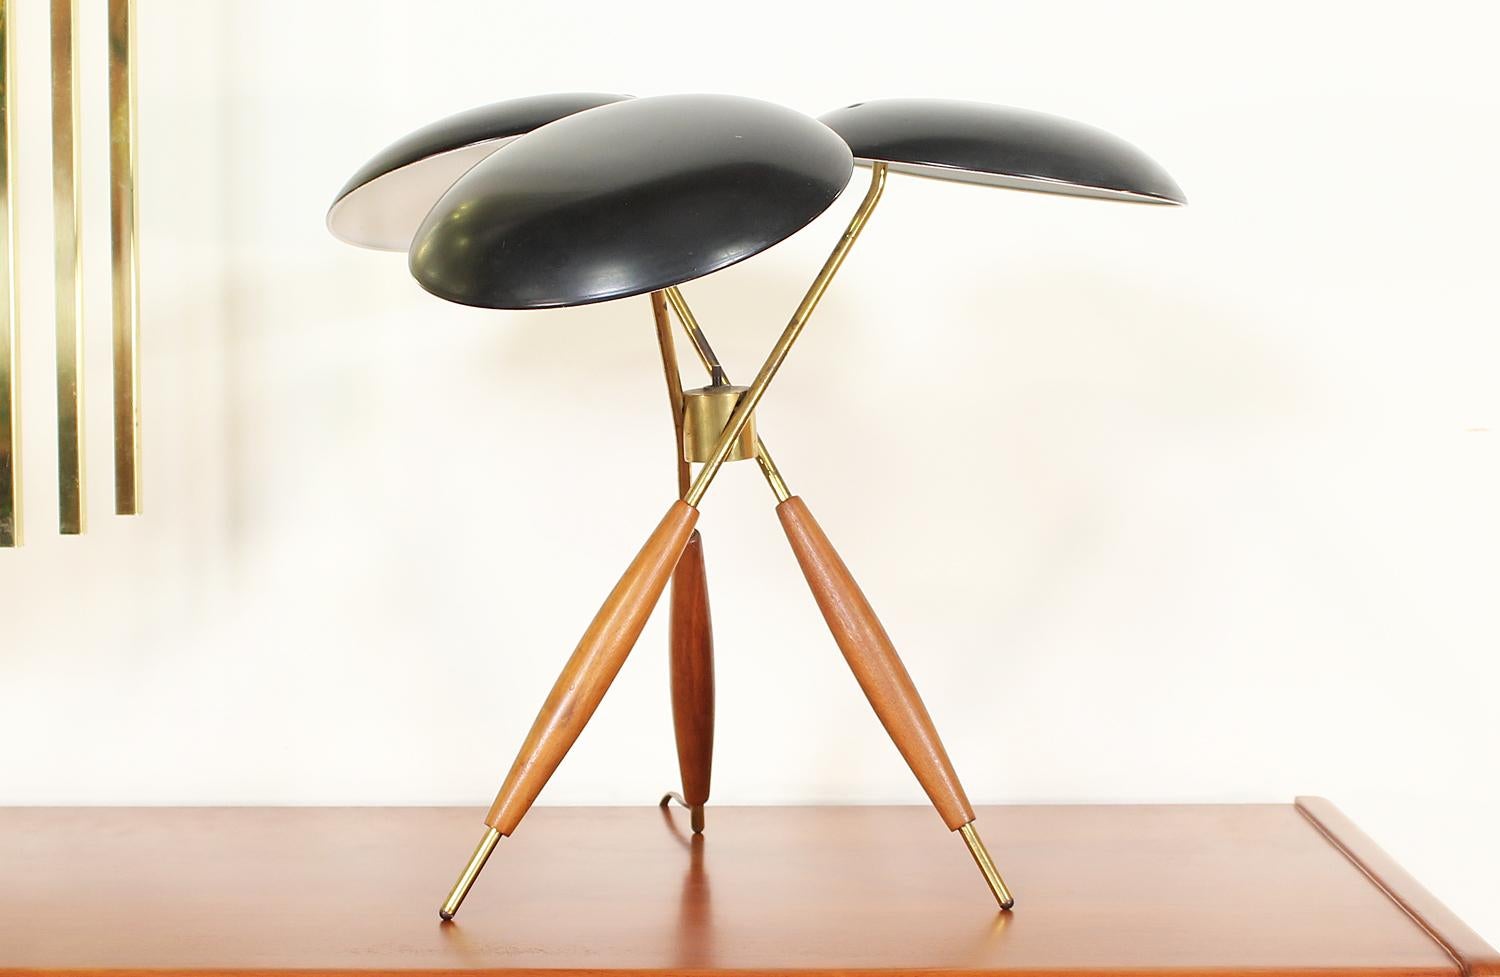 Stunning table lamp designed by Gerald Thurston for Lightolier Co. in the United States, circa 1950s. This stylish lamp features an iconic design with three black lacquered steel shades, creating a unique modern aesthetic, and a distinguished tripod